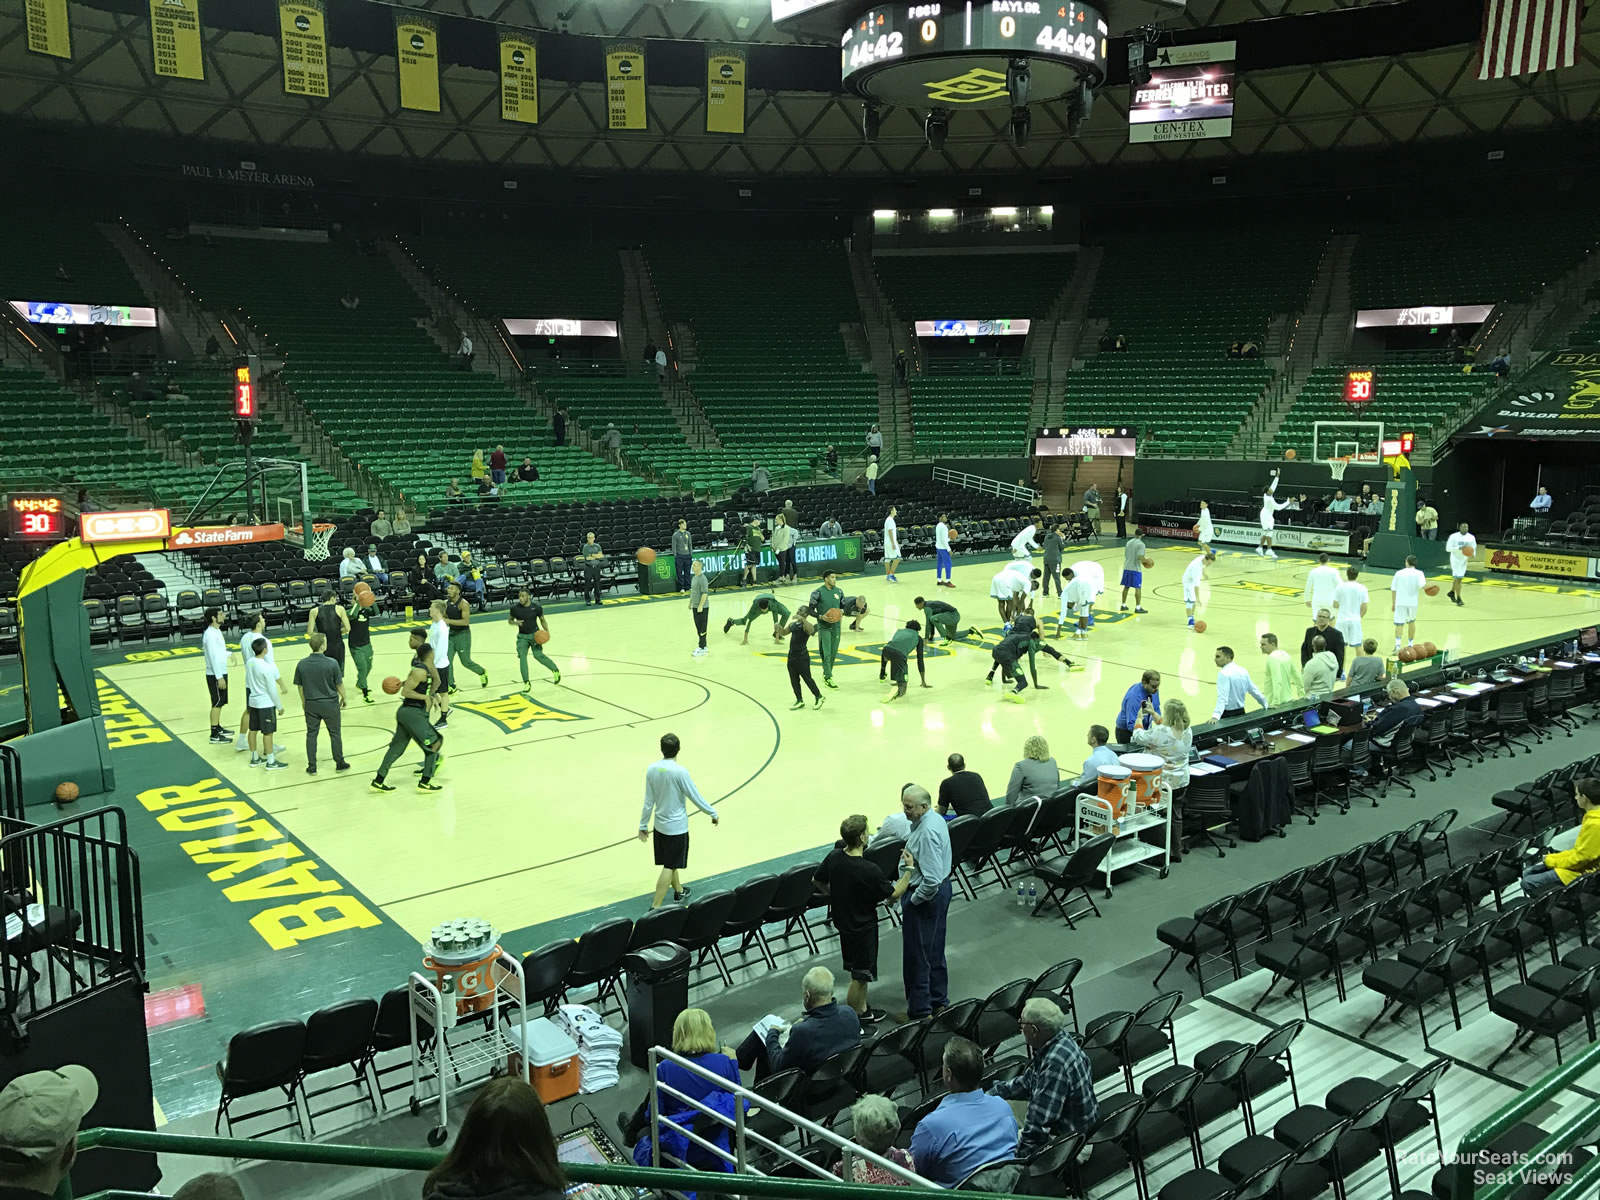 section 116, row 10 seat view  - ferrell center